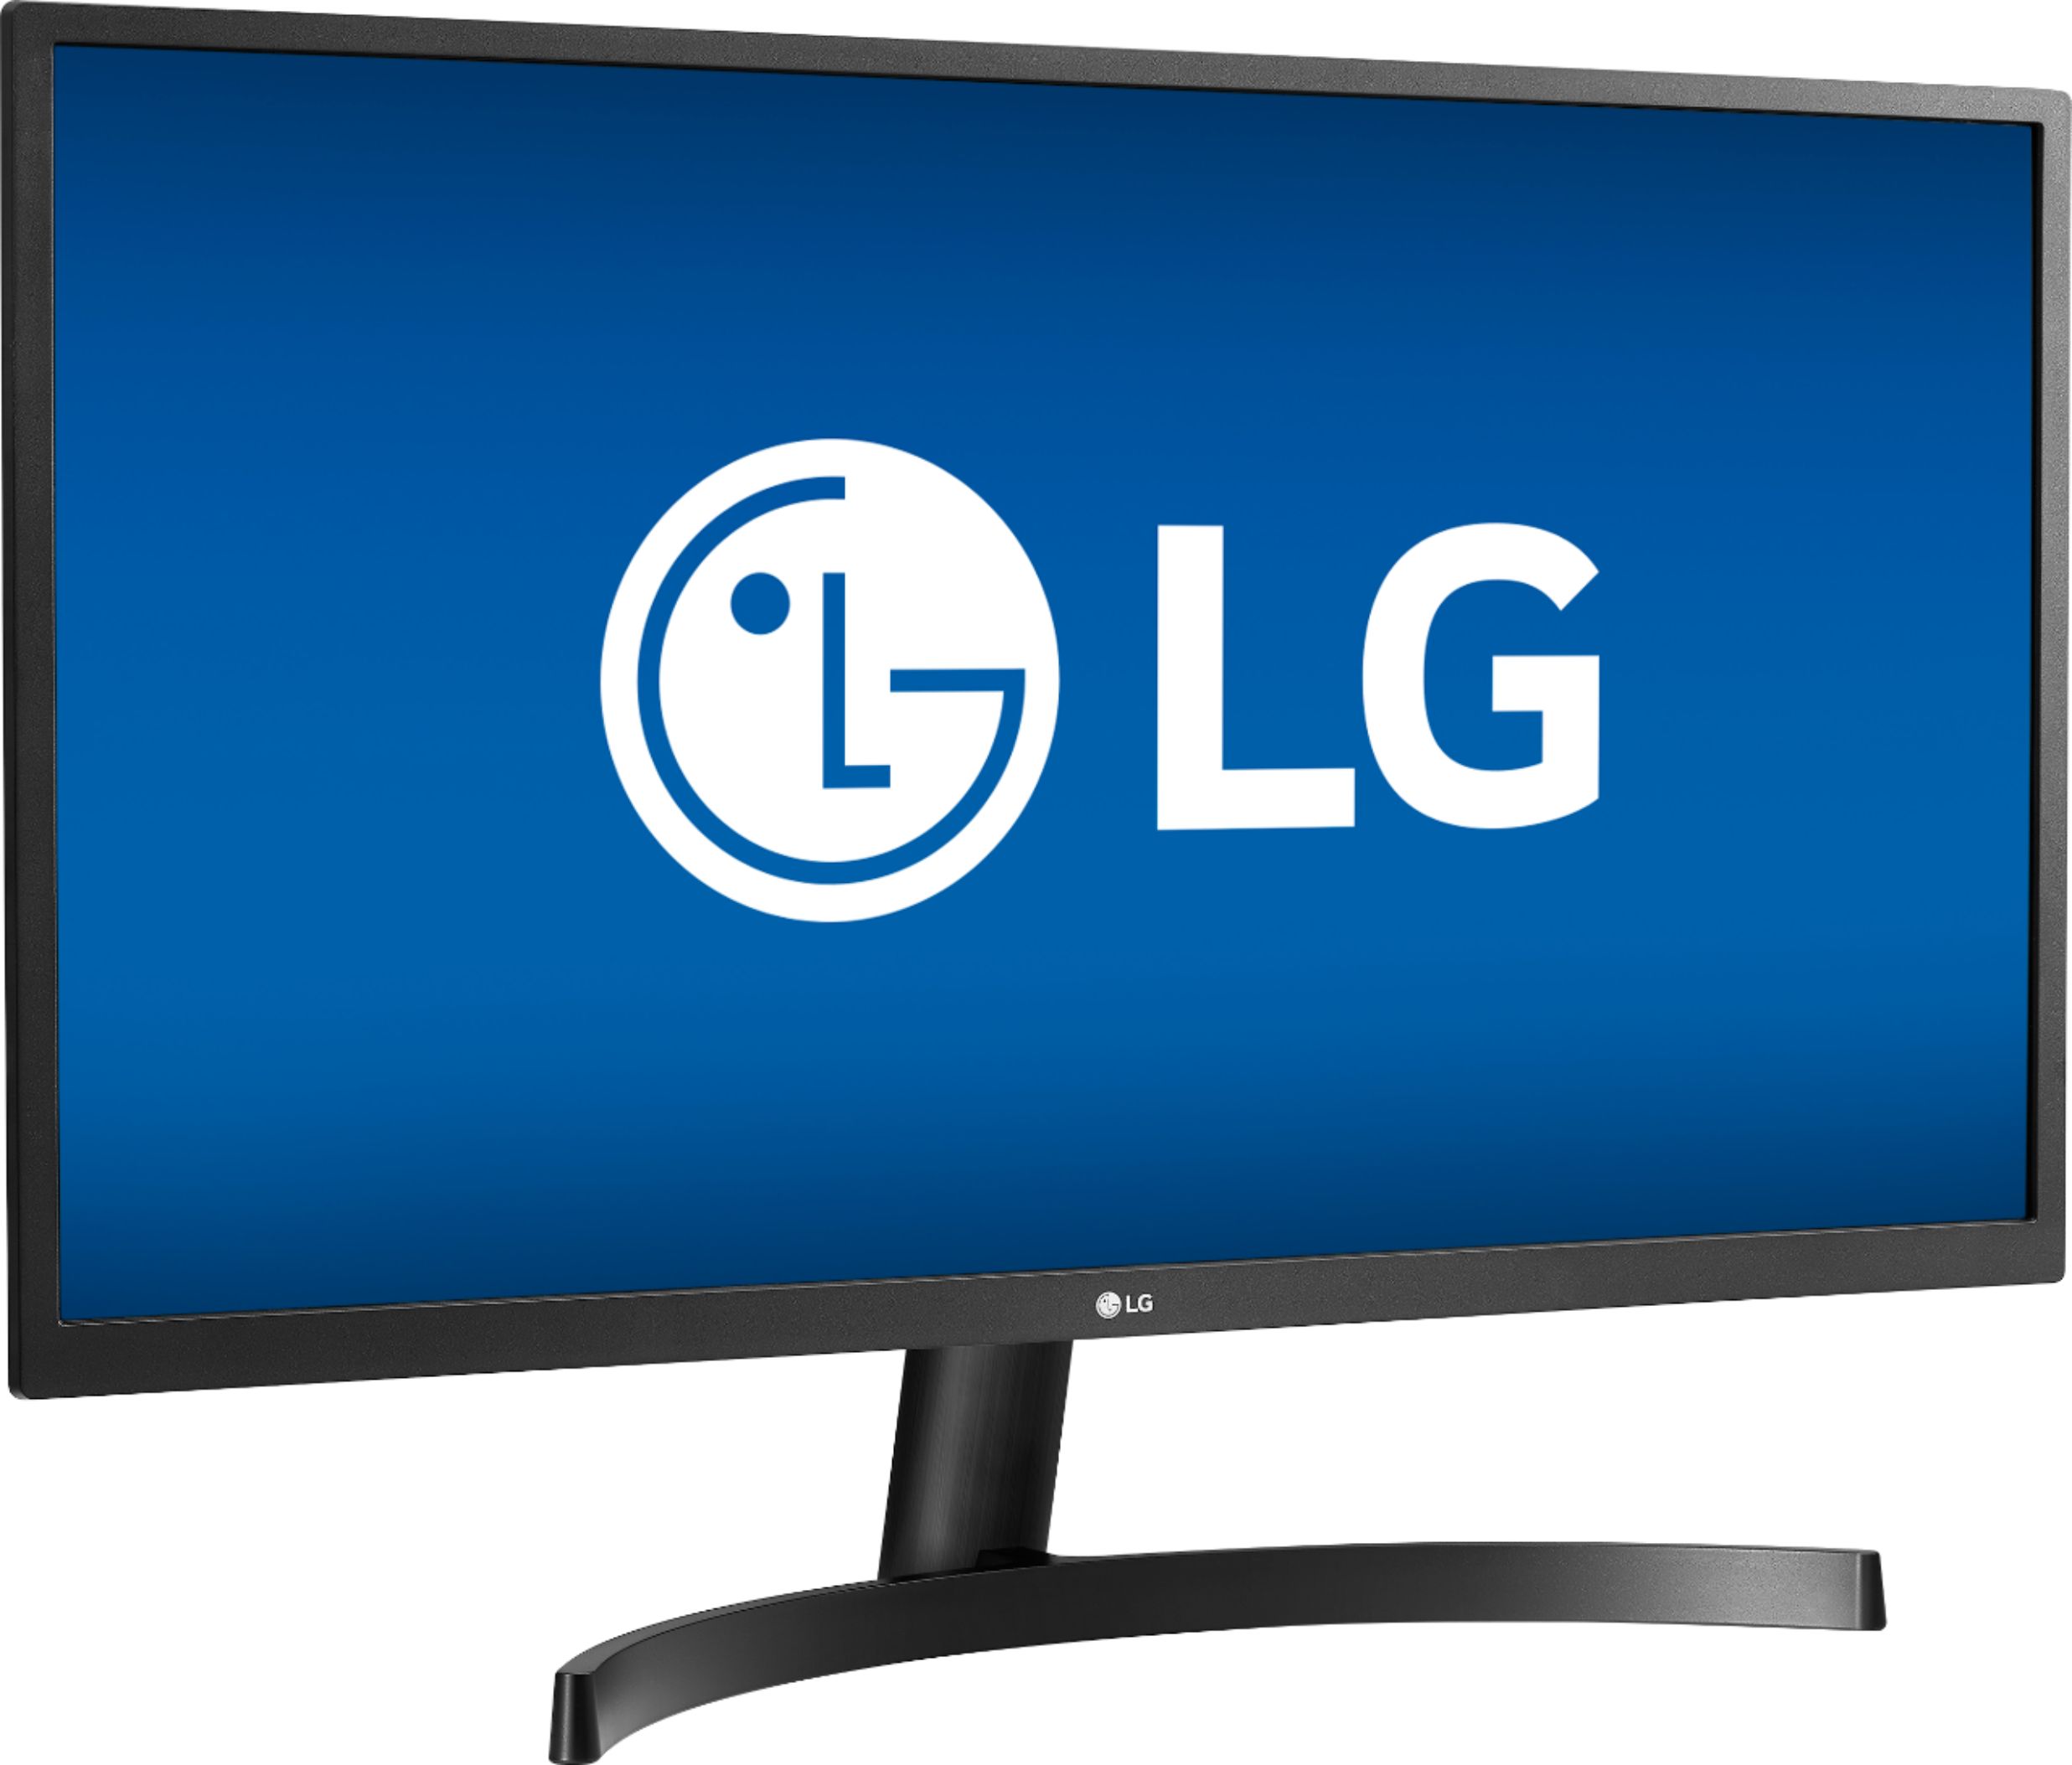 Angle View: LG - 27" UHD IPS Monitor with FreeSync - Silver